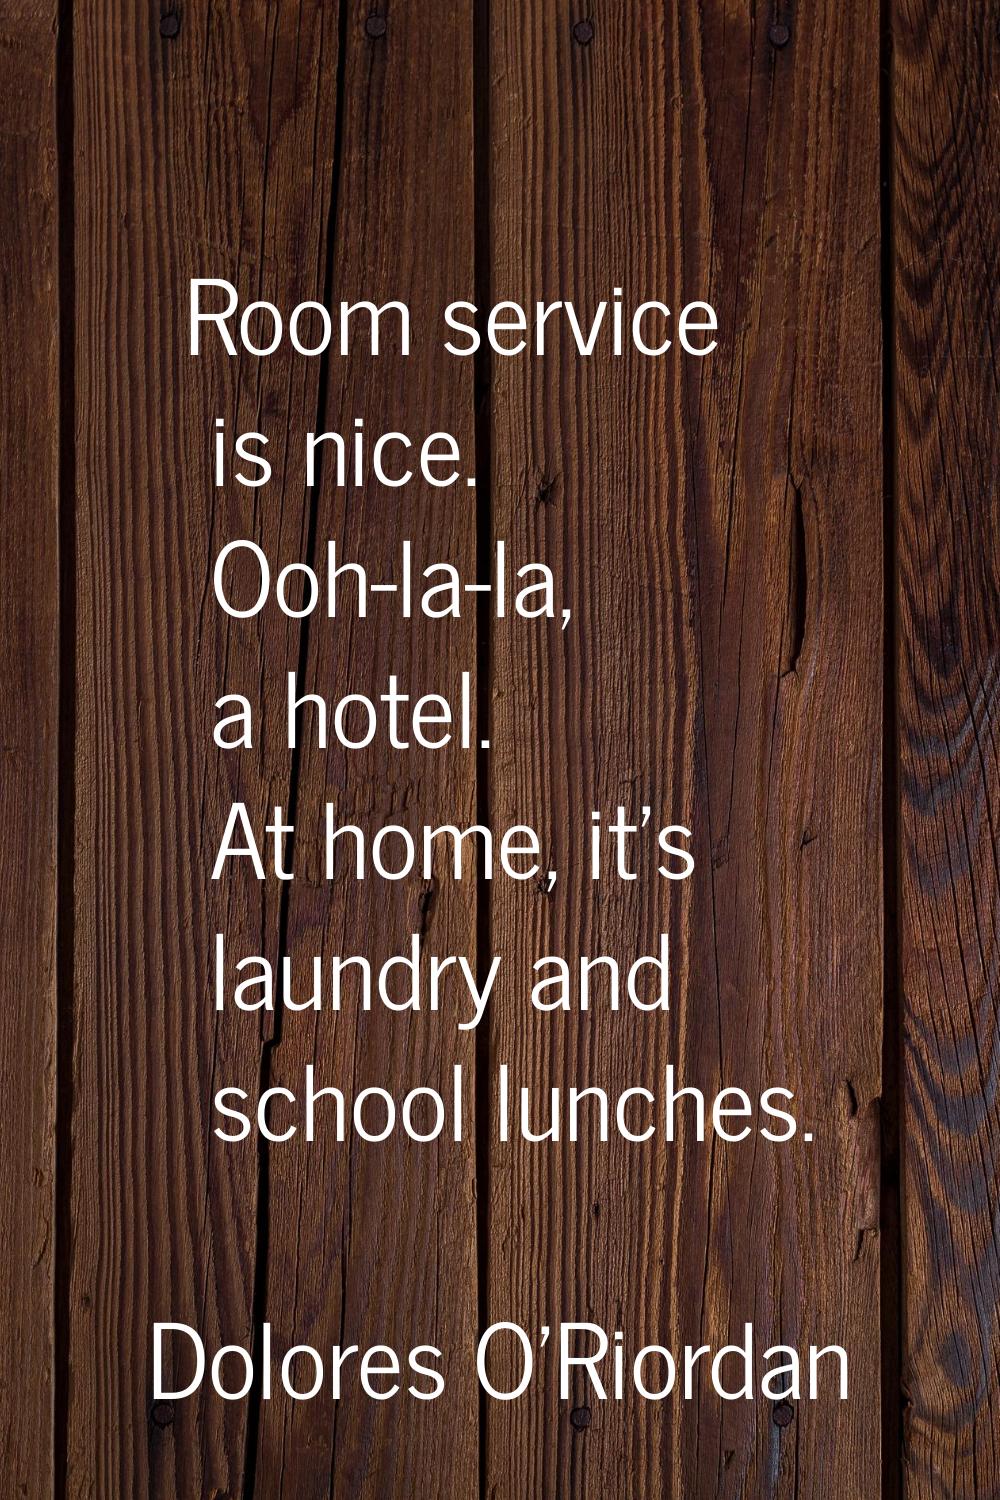 Room service is nice. Ooh-la-la, a hotel. At home, it's laundry and school lunches.